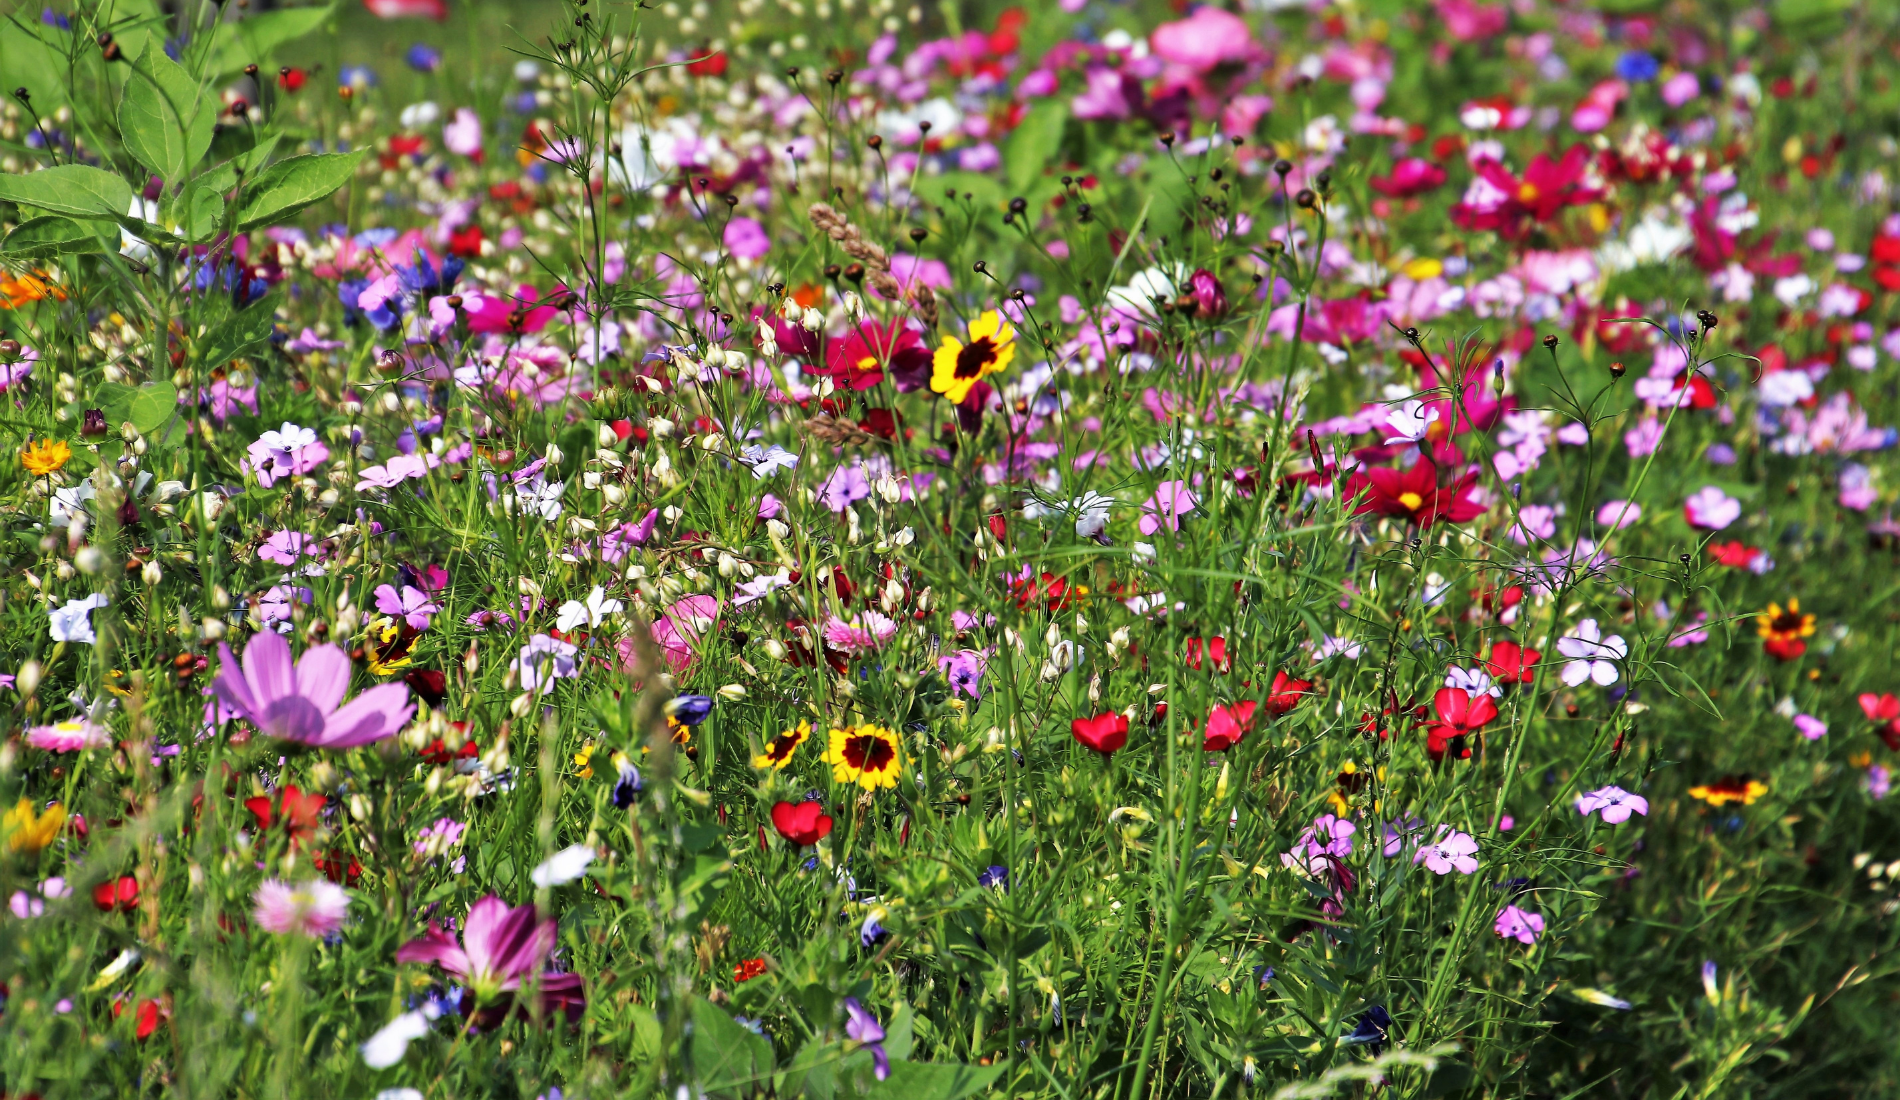 Wildflowers in the Meadow